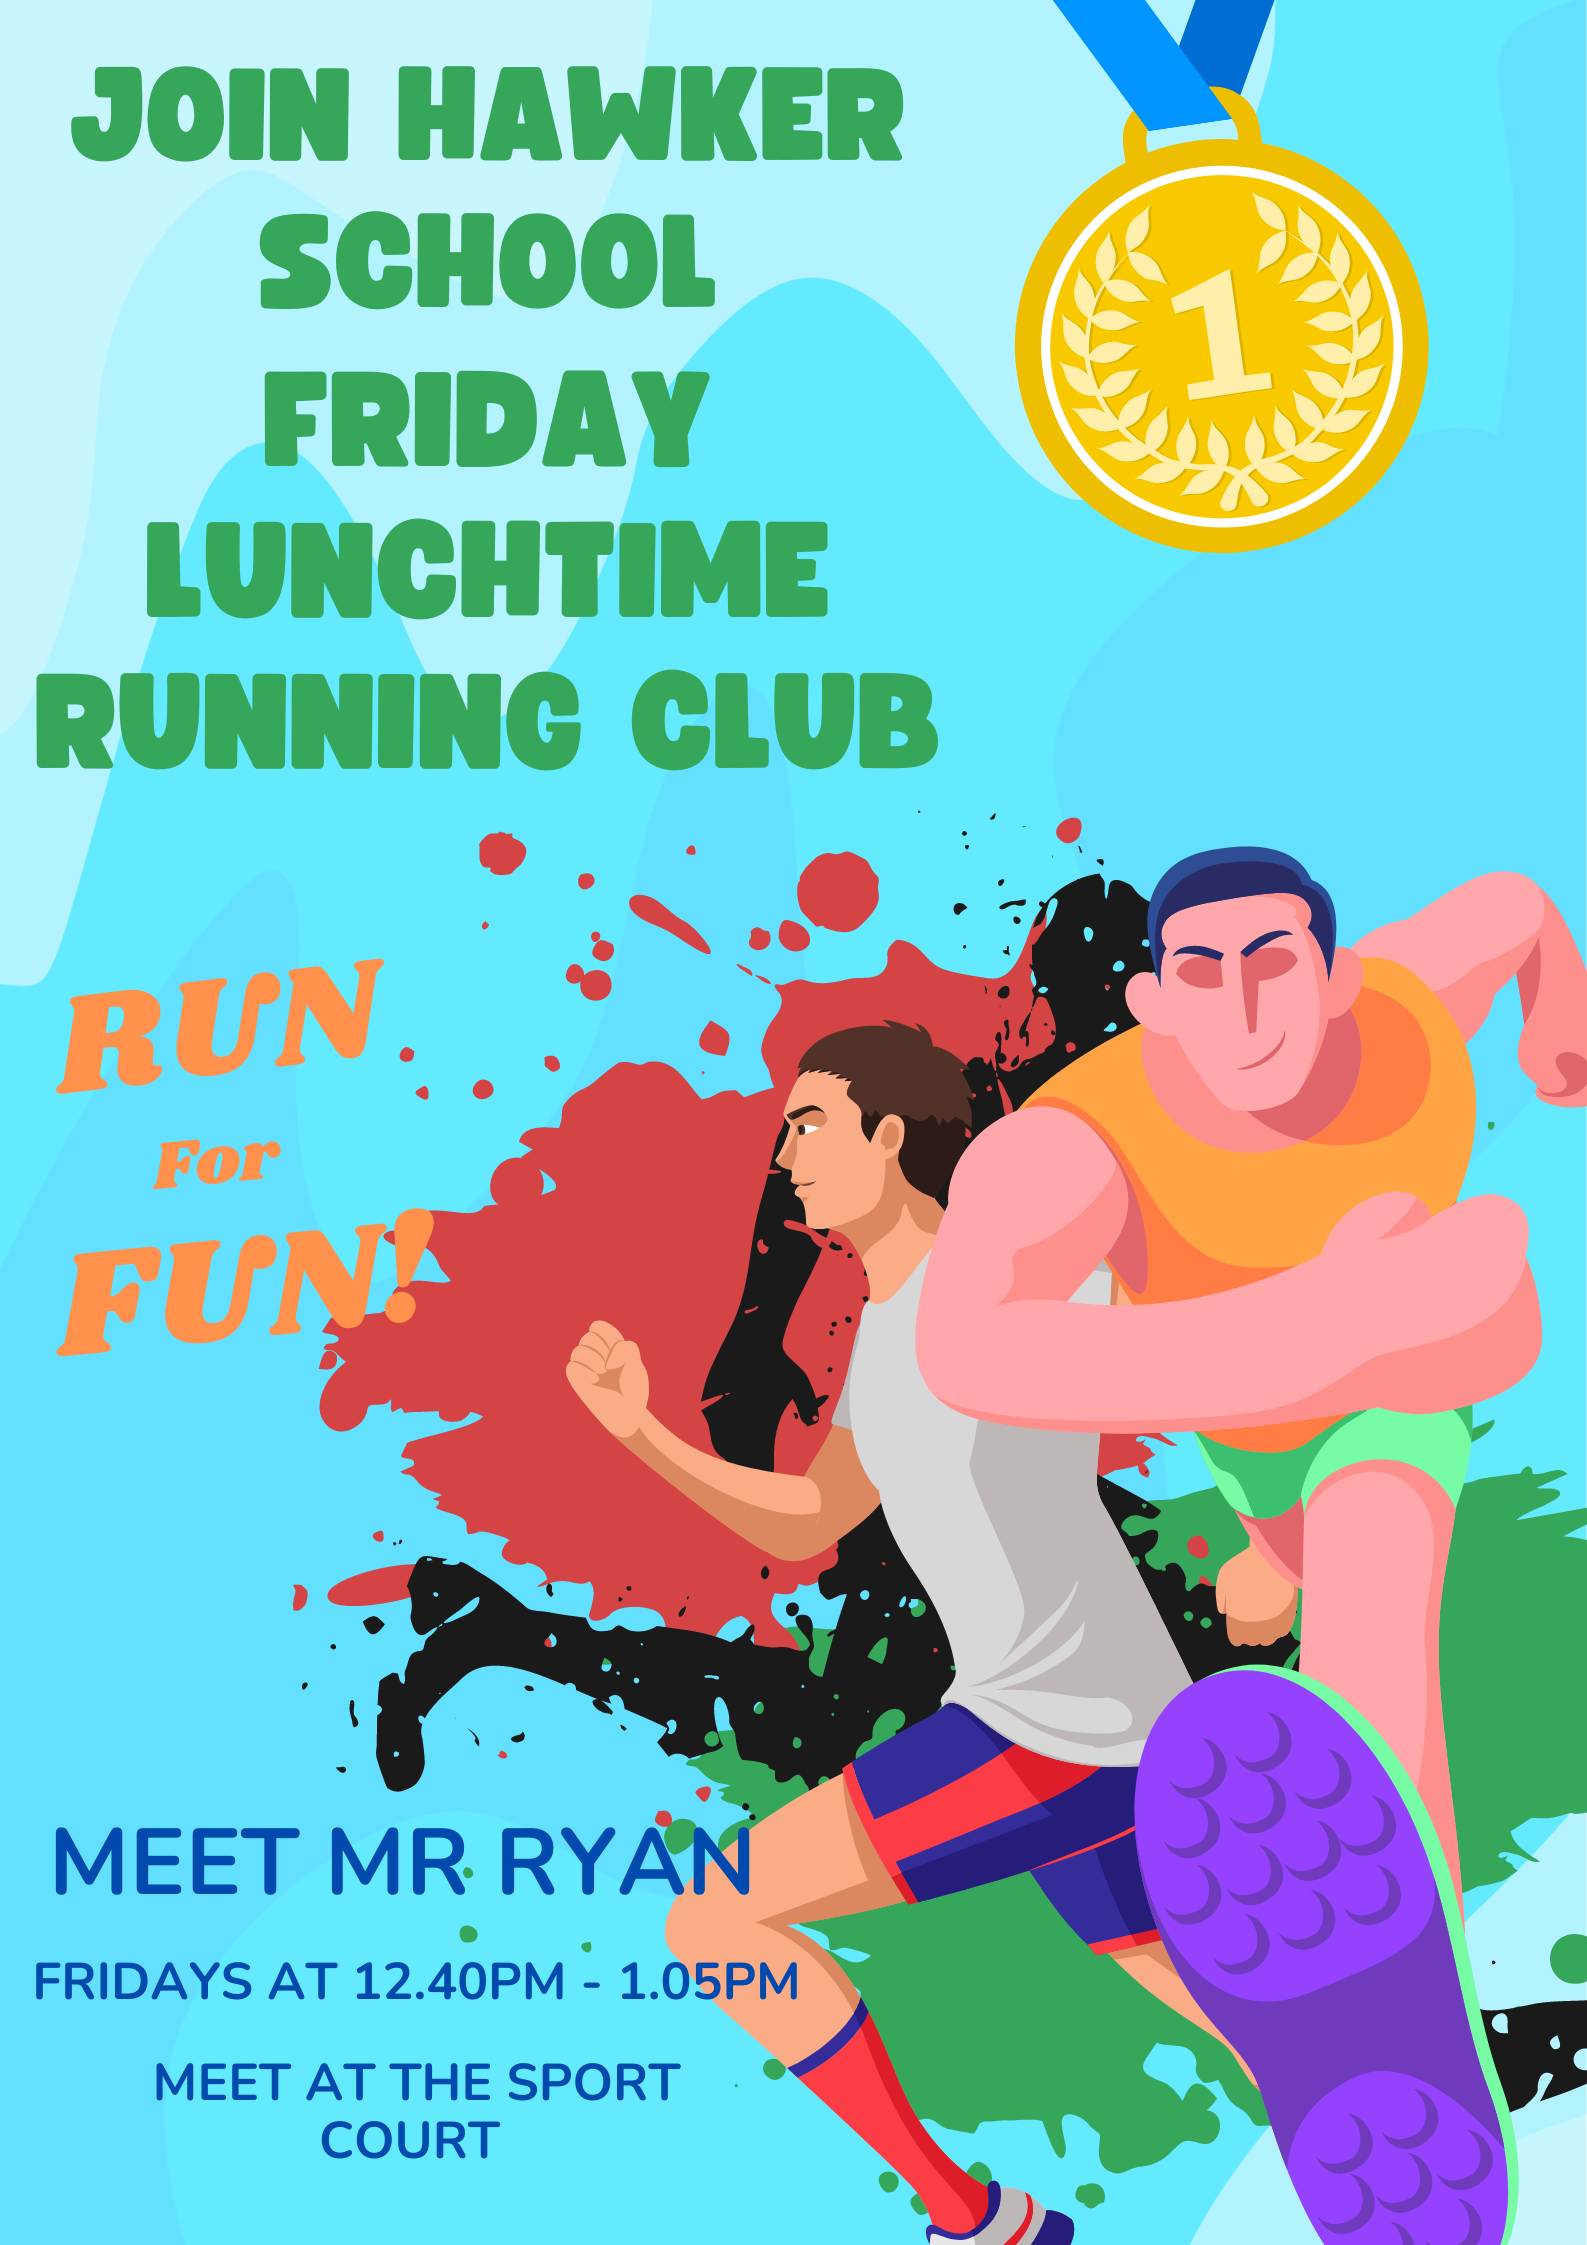 Friday lunchtime running club